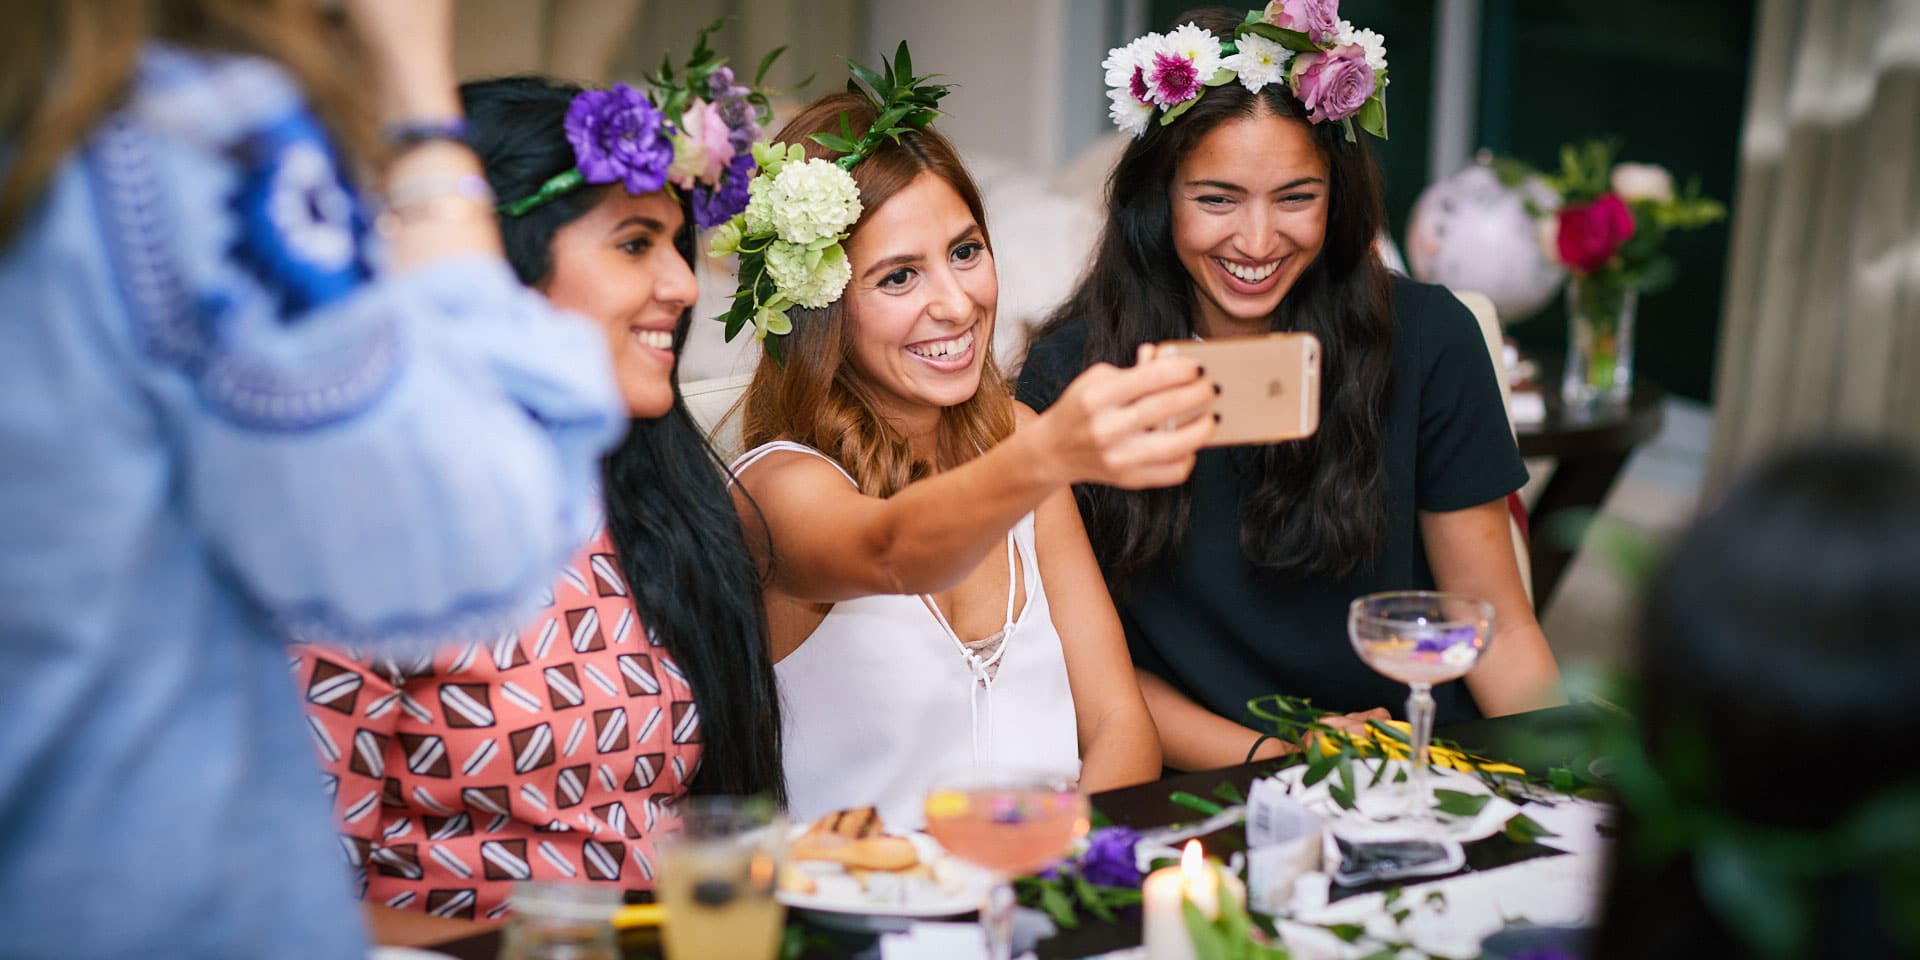 Noreen Wasti Shares Tips on Creating an Unforgettable “Girls Night in” Staycation